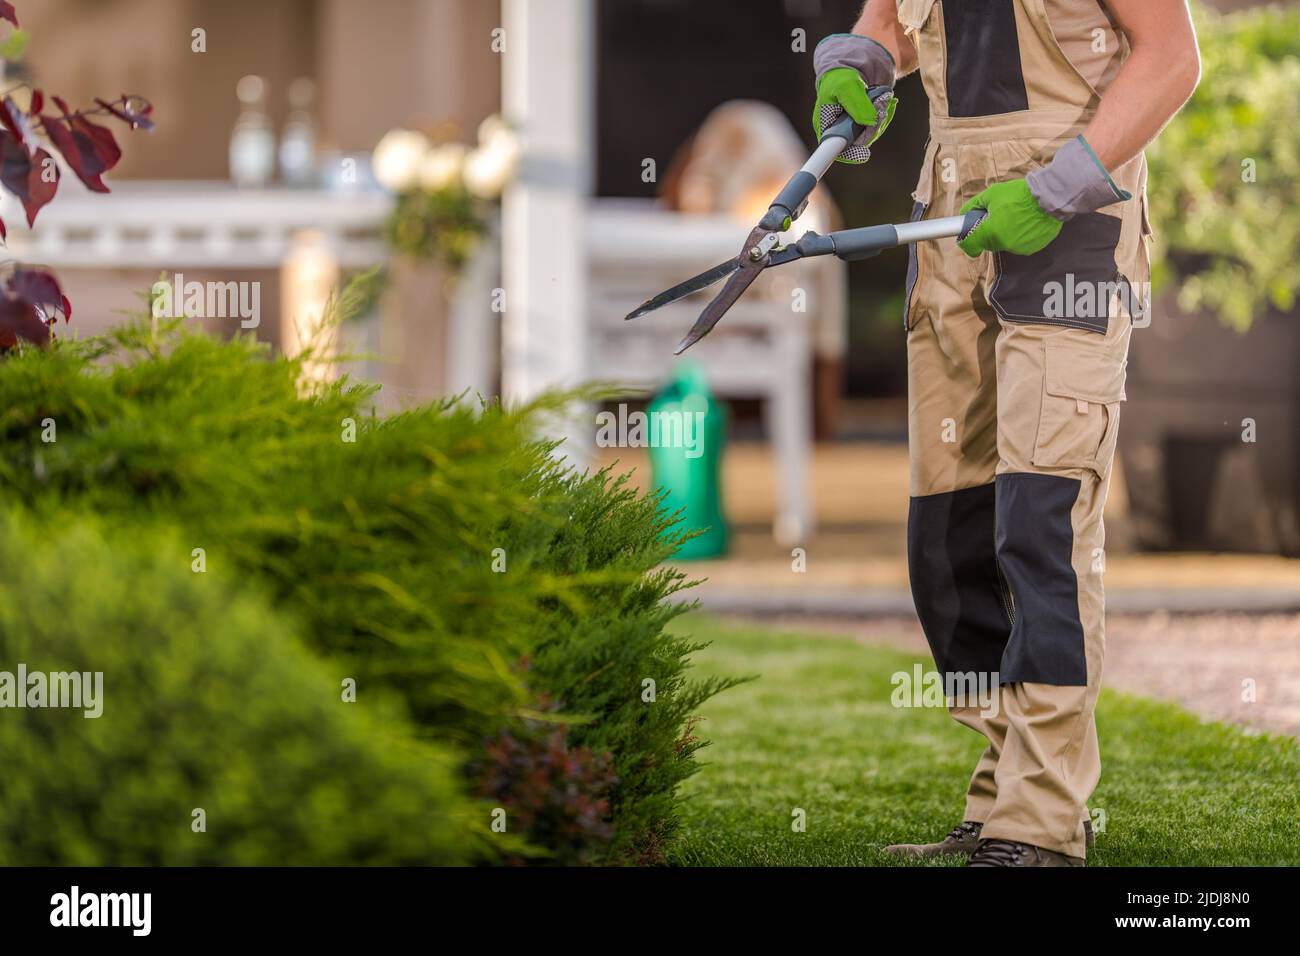 Gardener Heading Towards Green Plants Holding Garden Scissors in His Hands Ready to Start the Pruning Work. Garden Care and Maintenance Services. Stock Photo